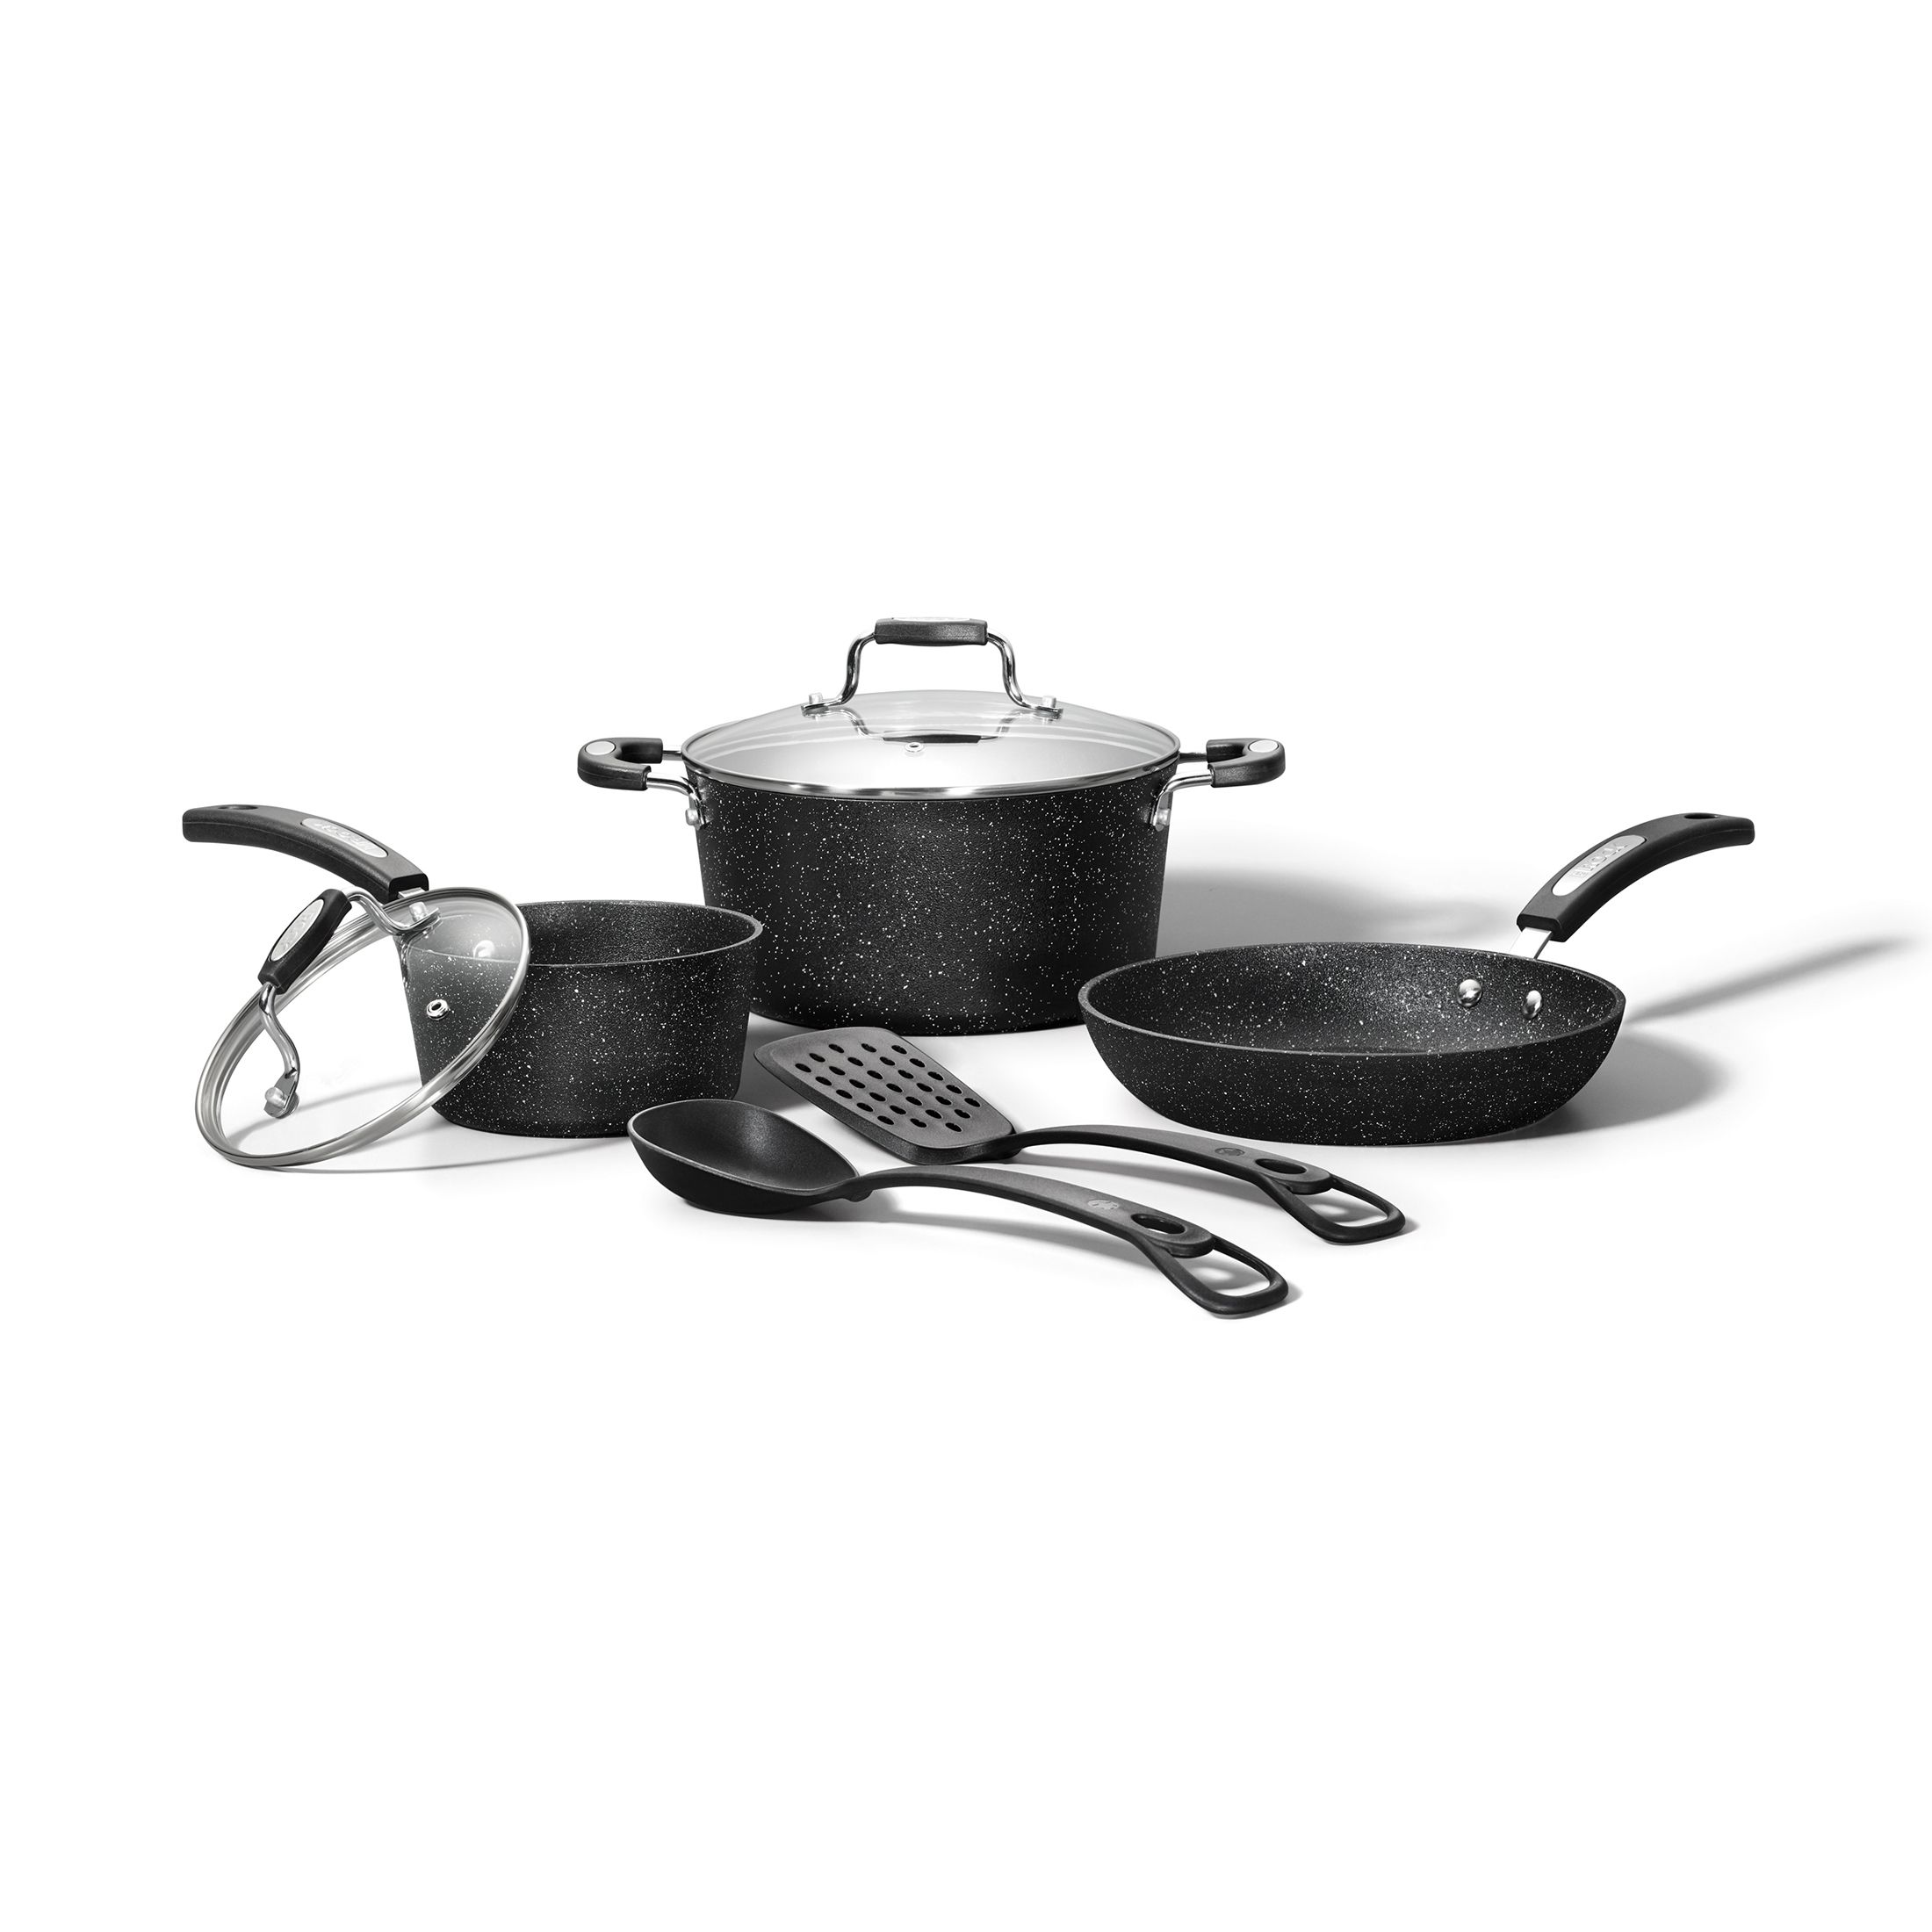 THE ROCK by Starfrit 060710-001-0000 12 Piece Cookware Set